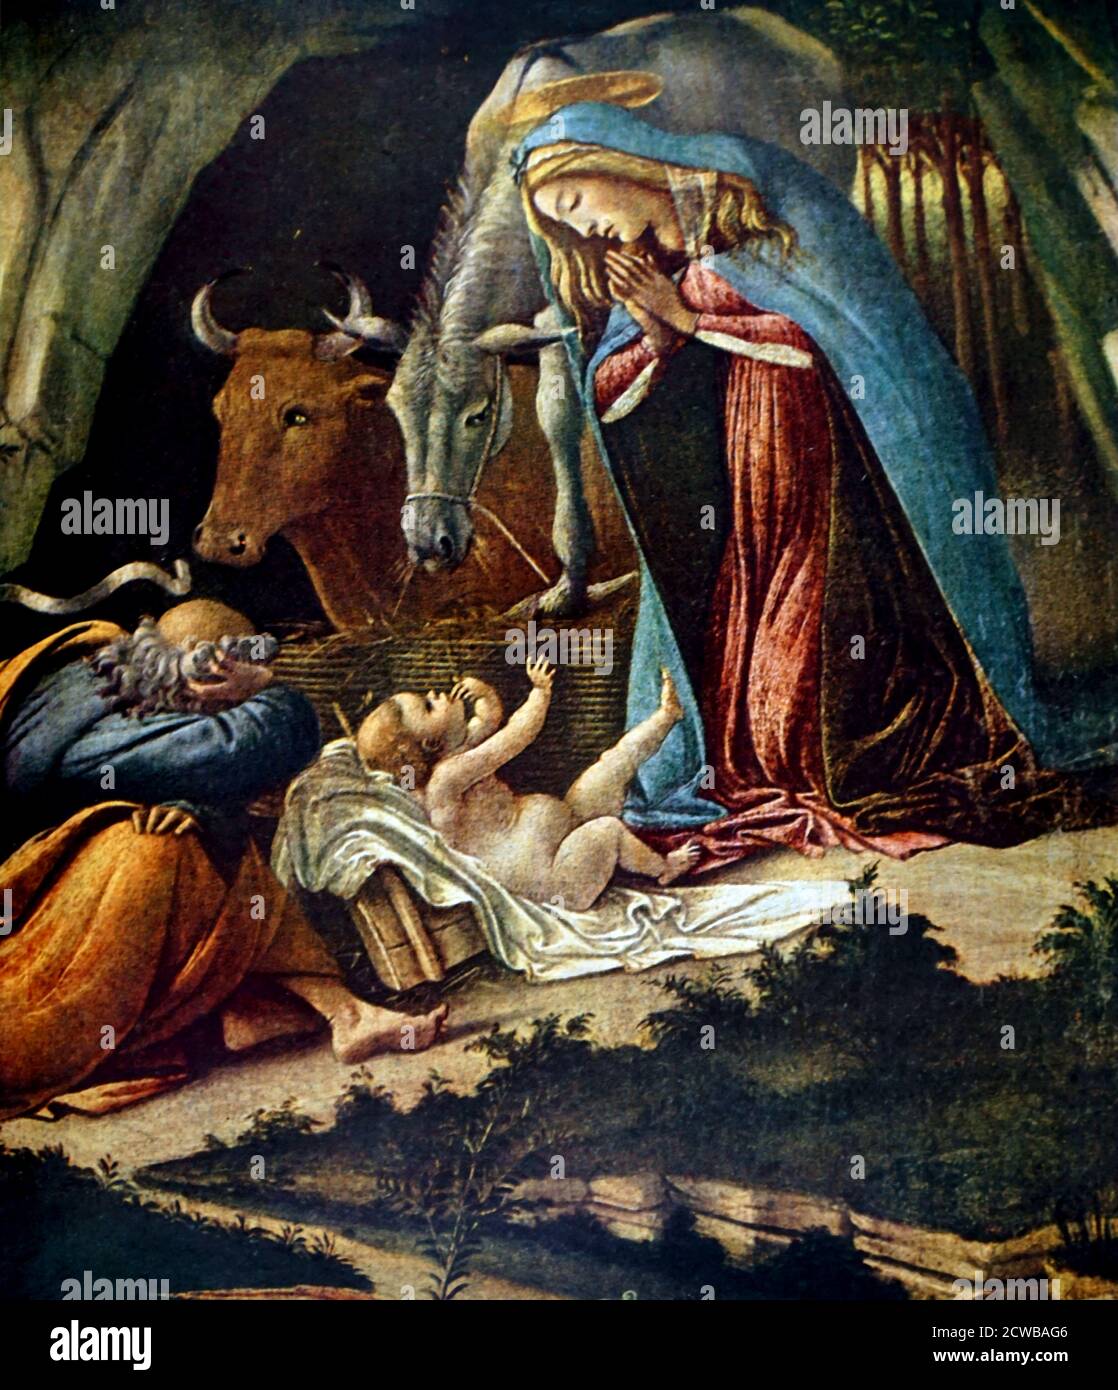 (detail) The Mystical Nativity is a painting dated c. 1500-1501 by the Italian Renaissance master Sandro Botticelli, in the National Gallery in London Stock Photo